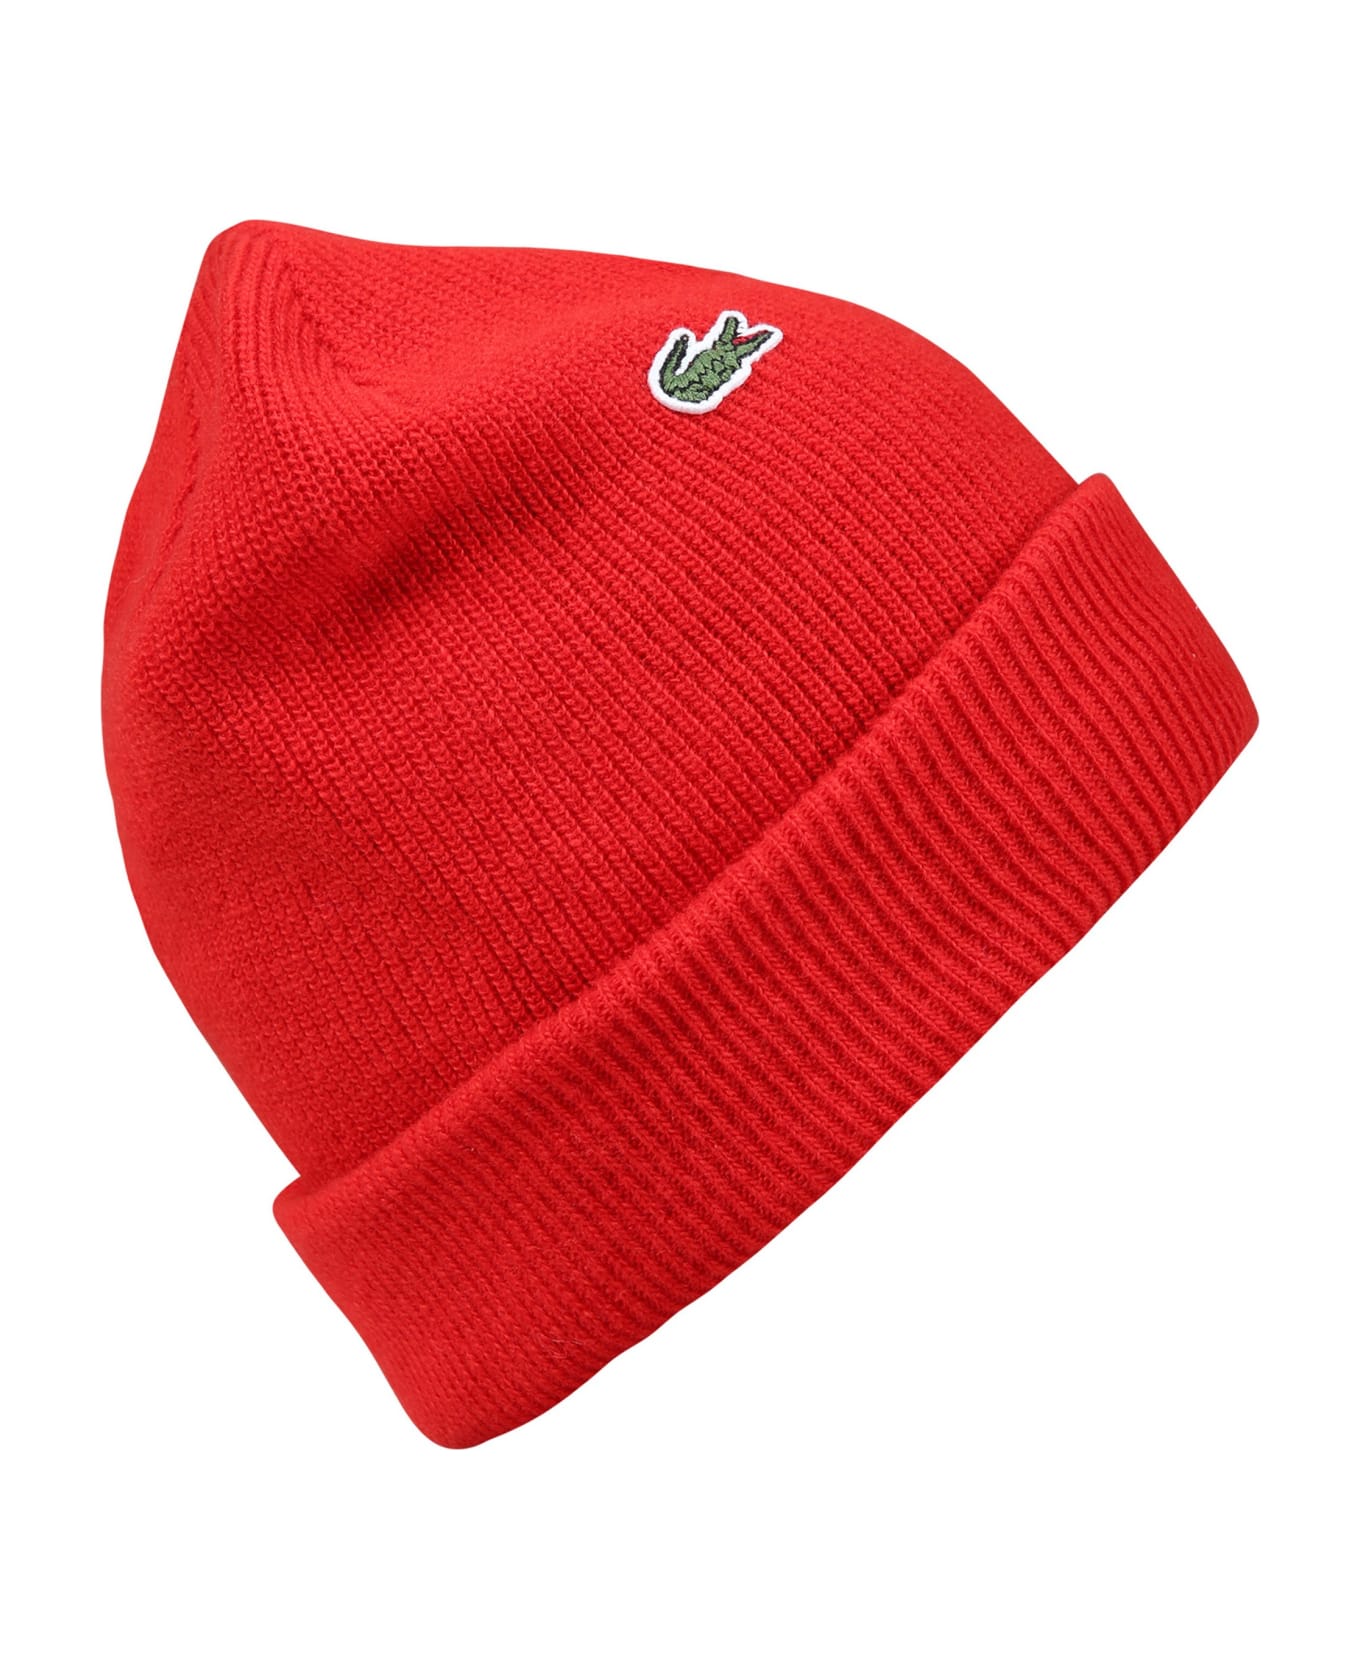 Lacoste Red Hat For Boy With Patch Of The Iconic Logo - Red